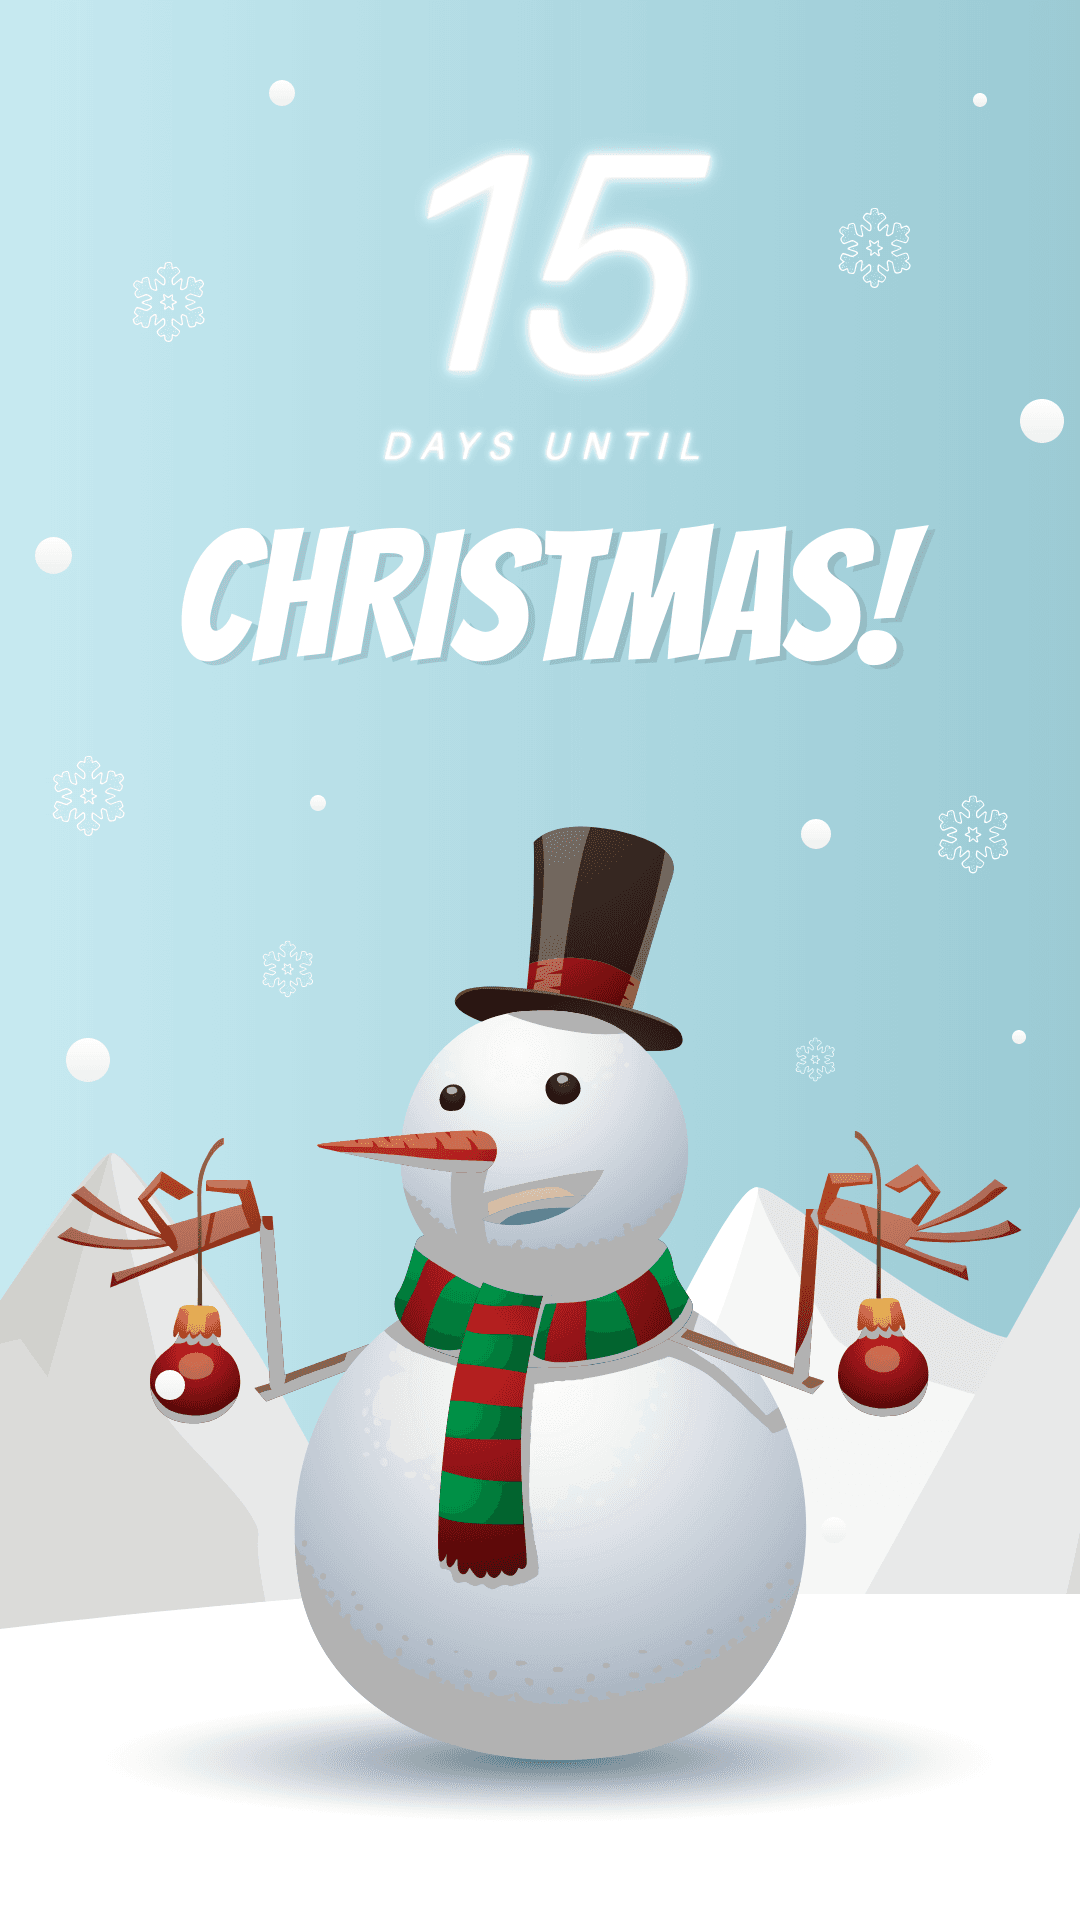 snowman-holding-baubles-christmas-instagram-story-template-thumbnail-img